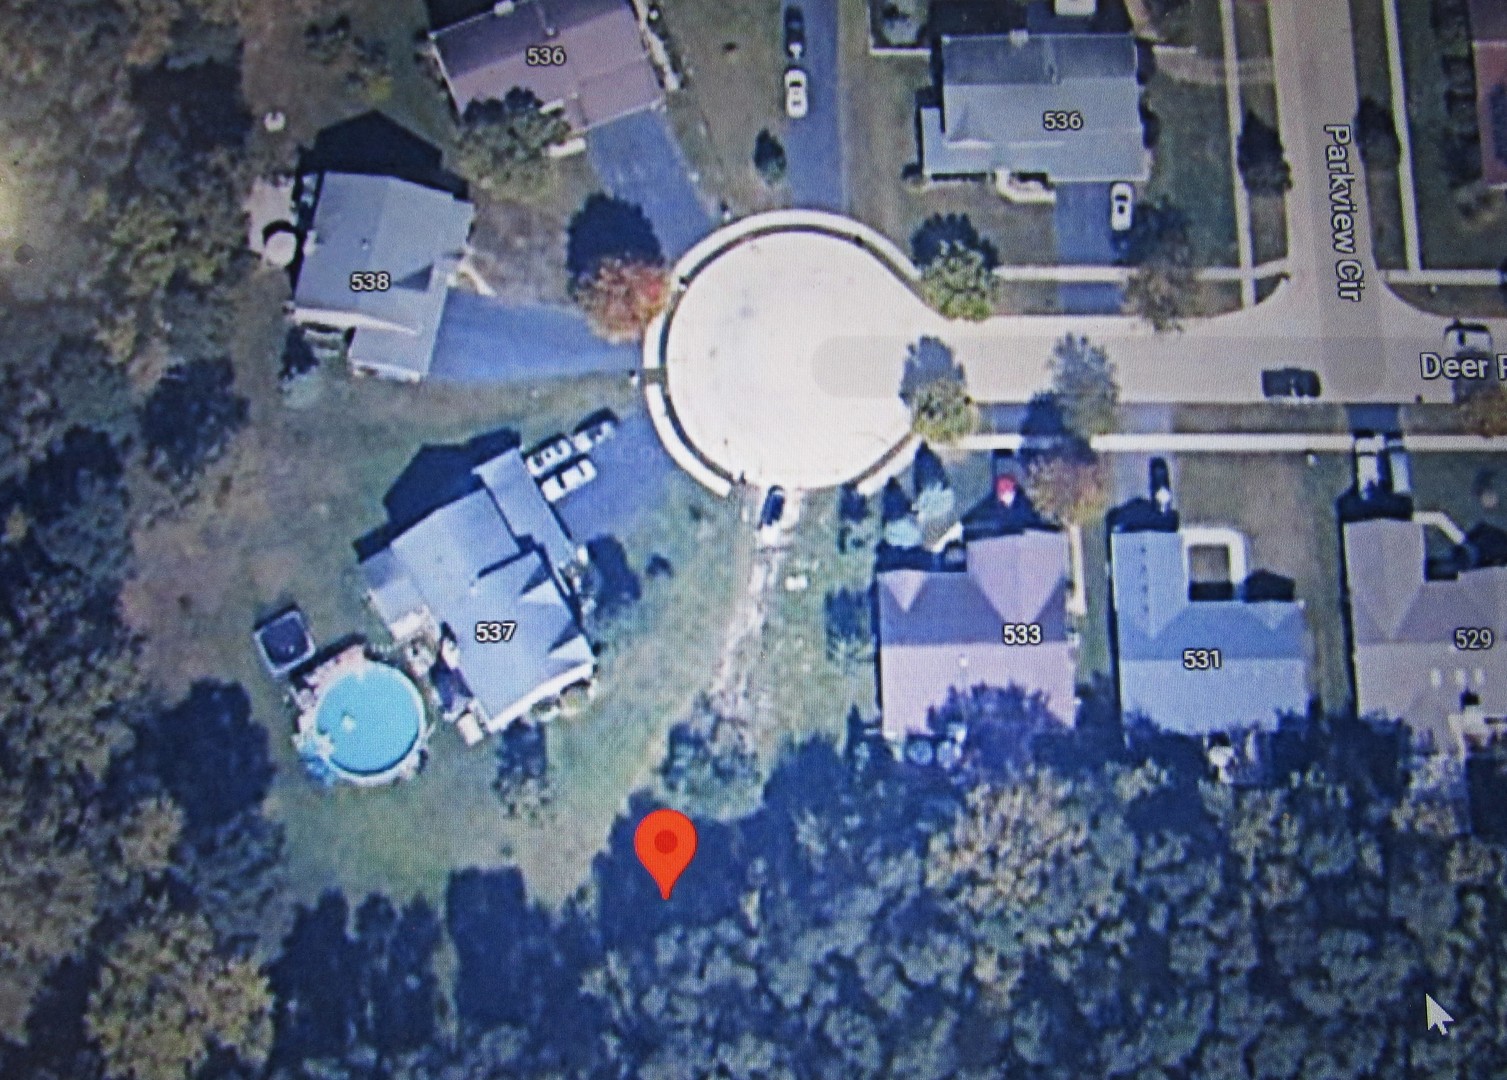 an aerial view of a house with garden space sitting space and swimming pool